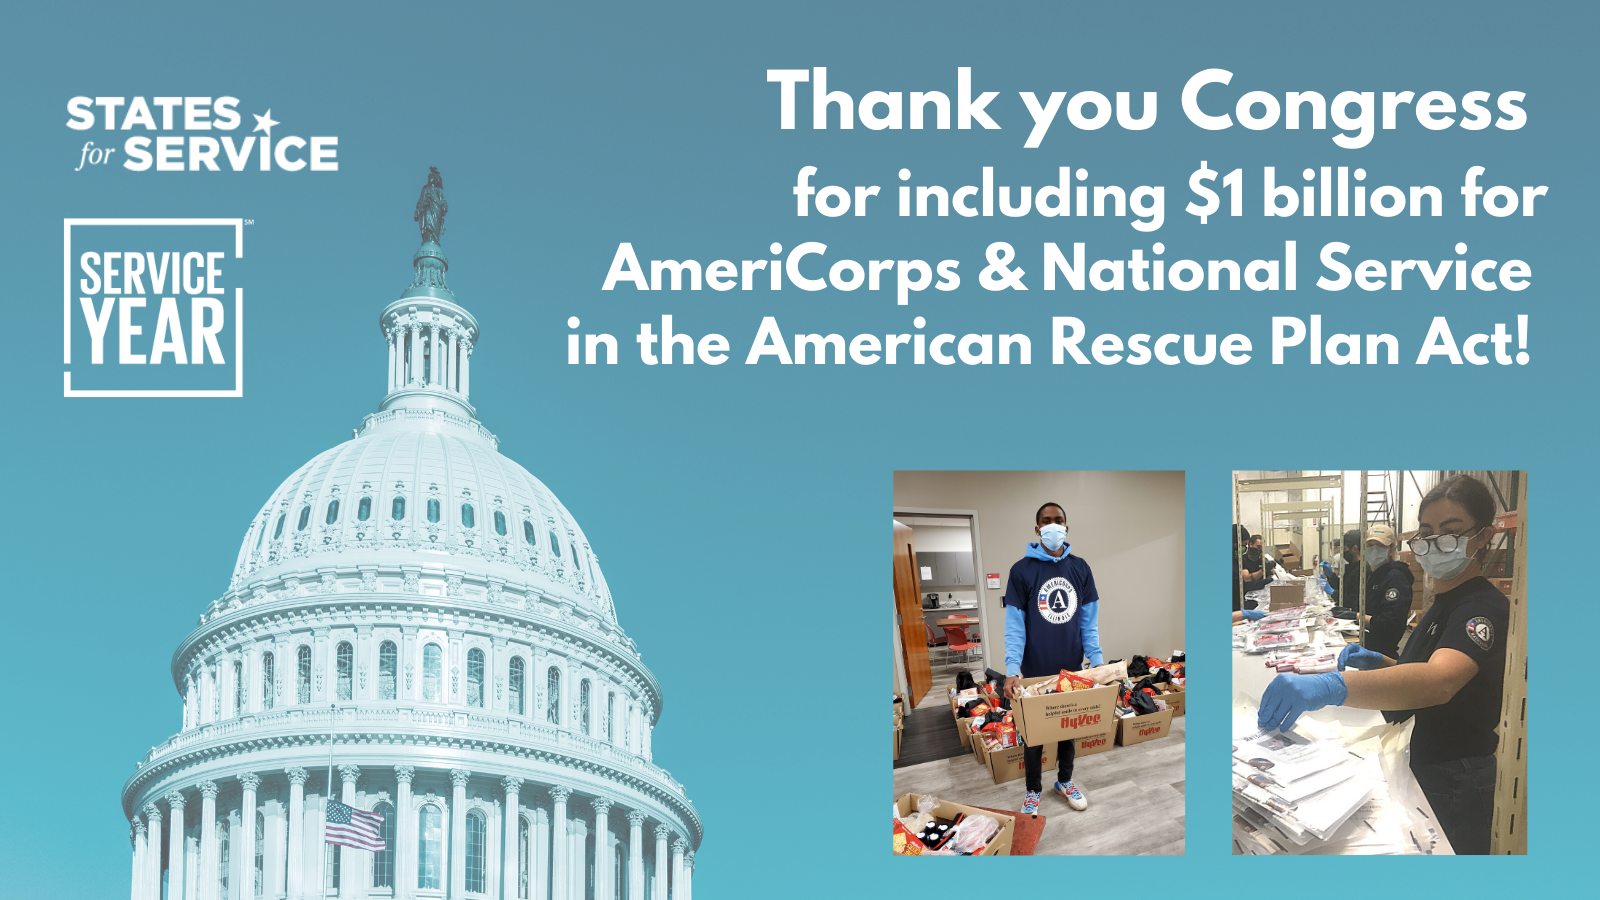 photo of Capitol building dome and two photos of AmeriCorps members serving. Text overlay reads Thank you Congress for including $1 billion for AmeriCorps and National Service in the American Rescue Plan Act! Includes States for Service logo and Service Year logo.